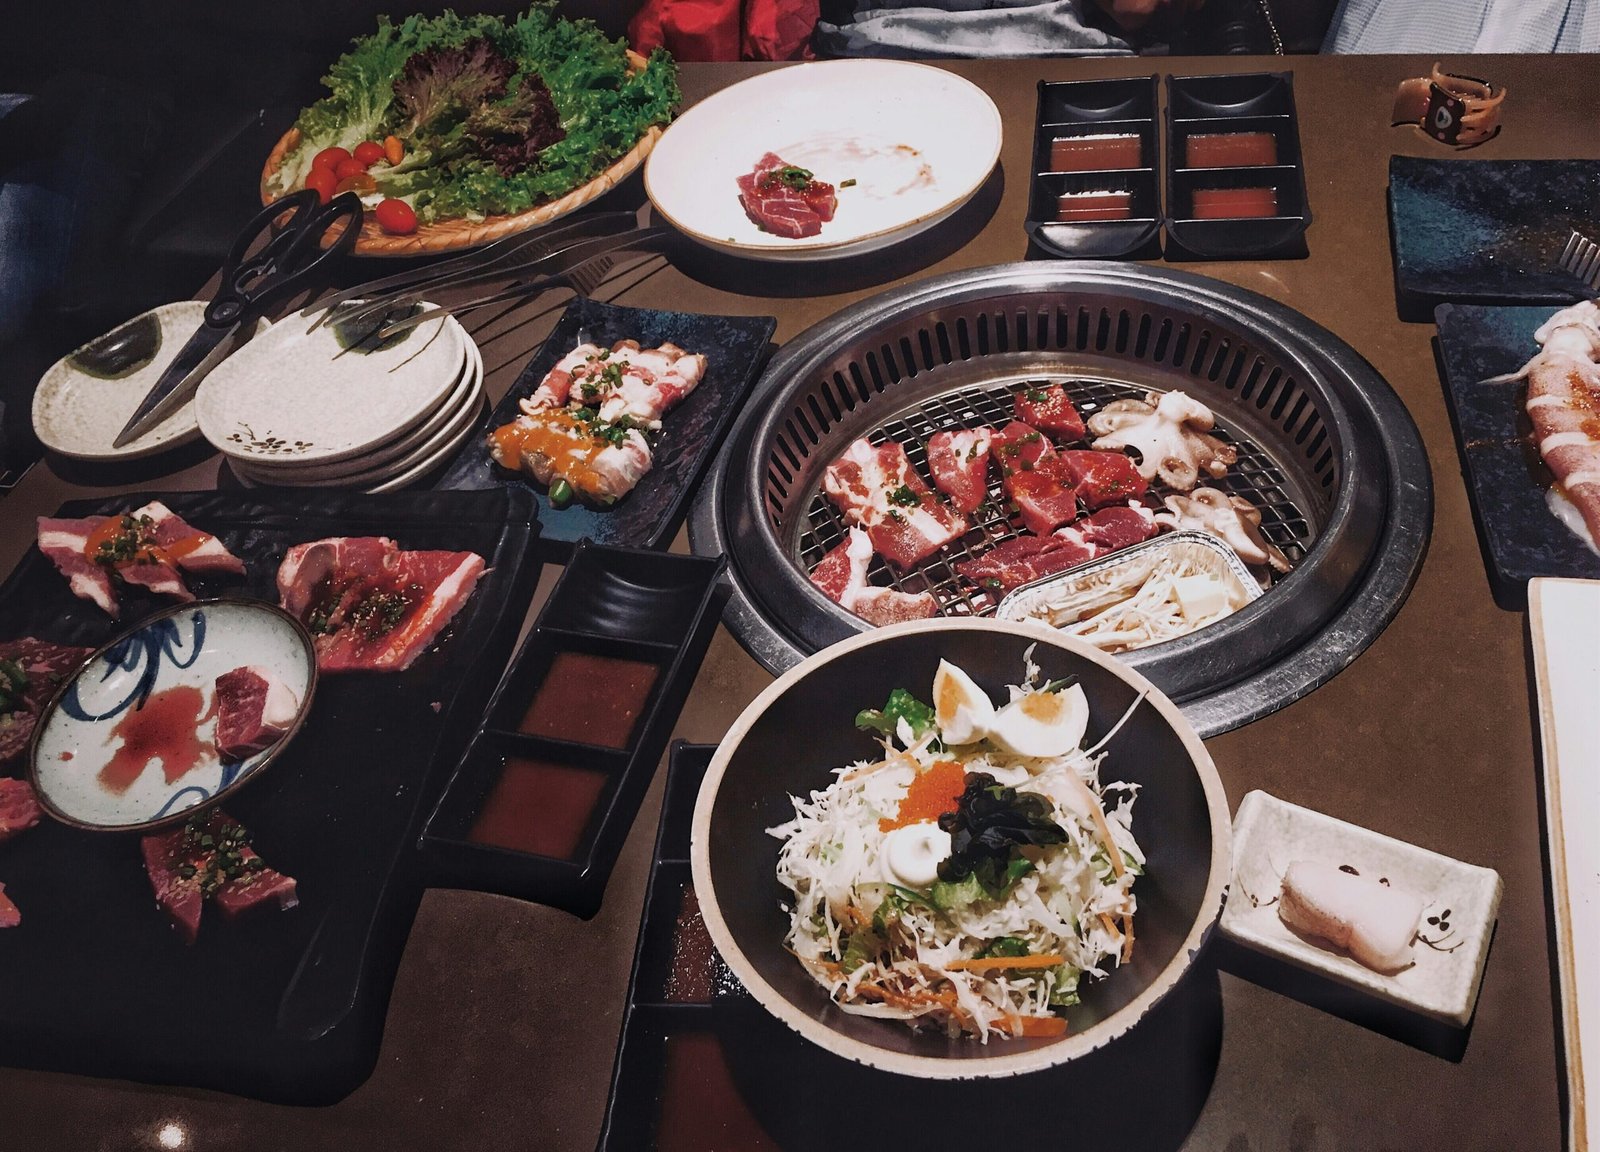 Can You Share Avant-garde Ideas For Presenting Korean Barbecue At Home?